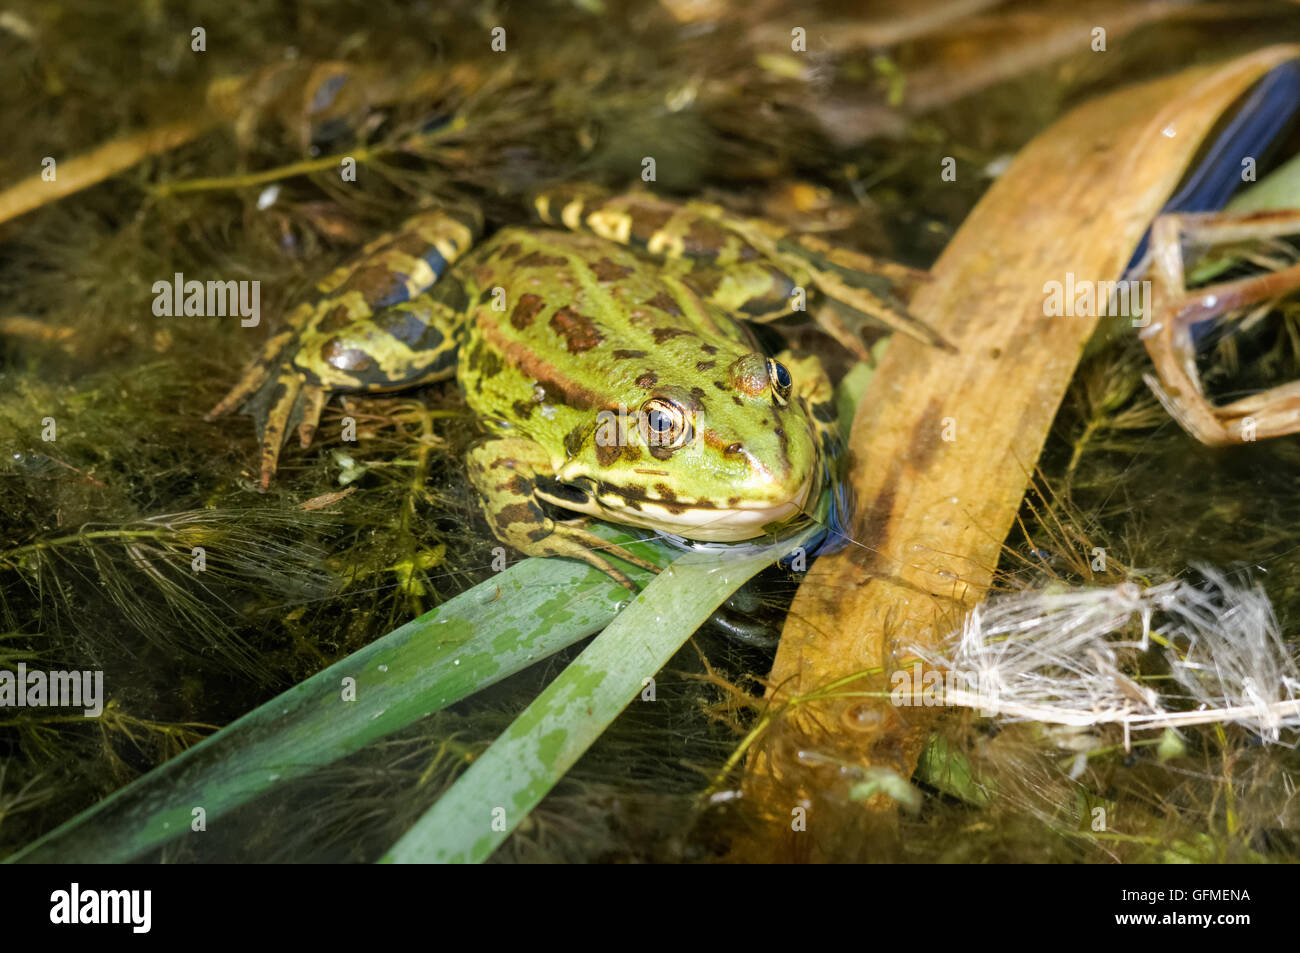 The pool frog (Pelophylax lessonae) in water at Rainham Marshes Nature Reserve in London England United Kingdom UK Stock Photo